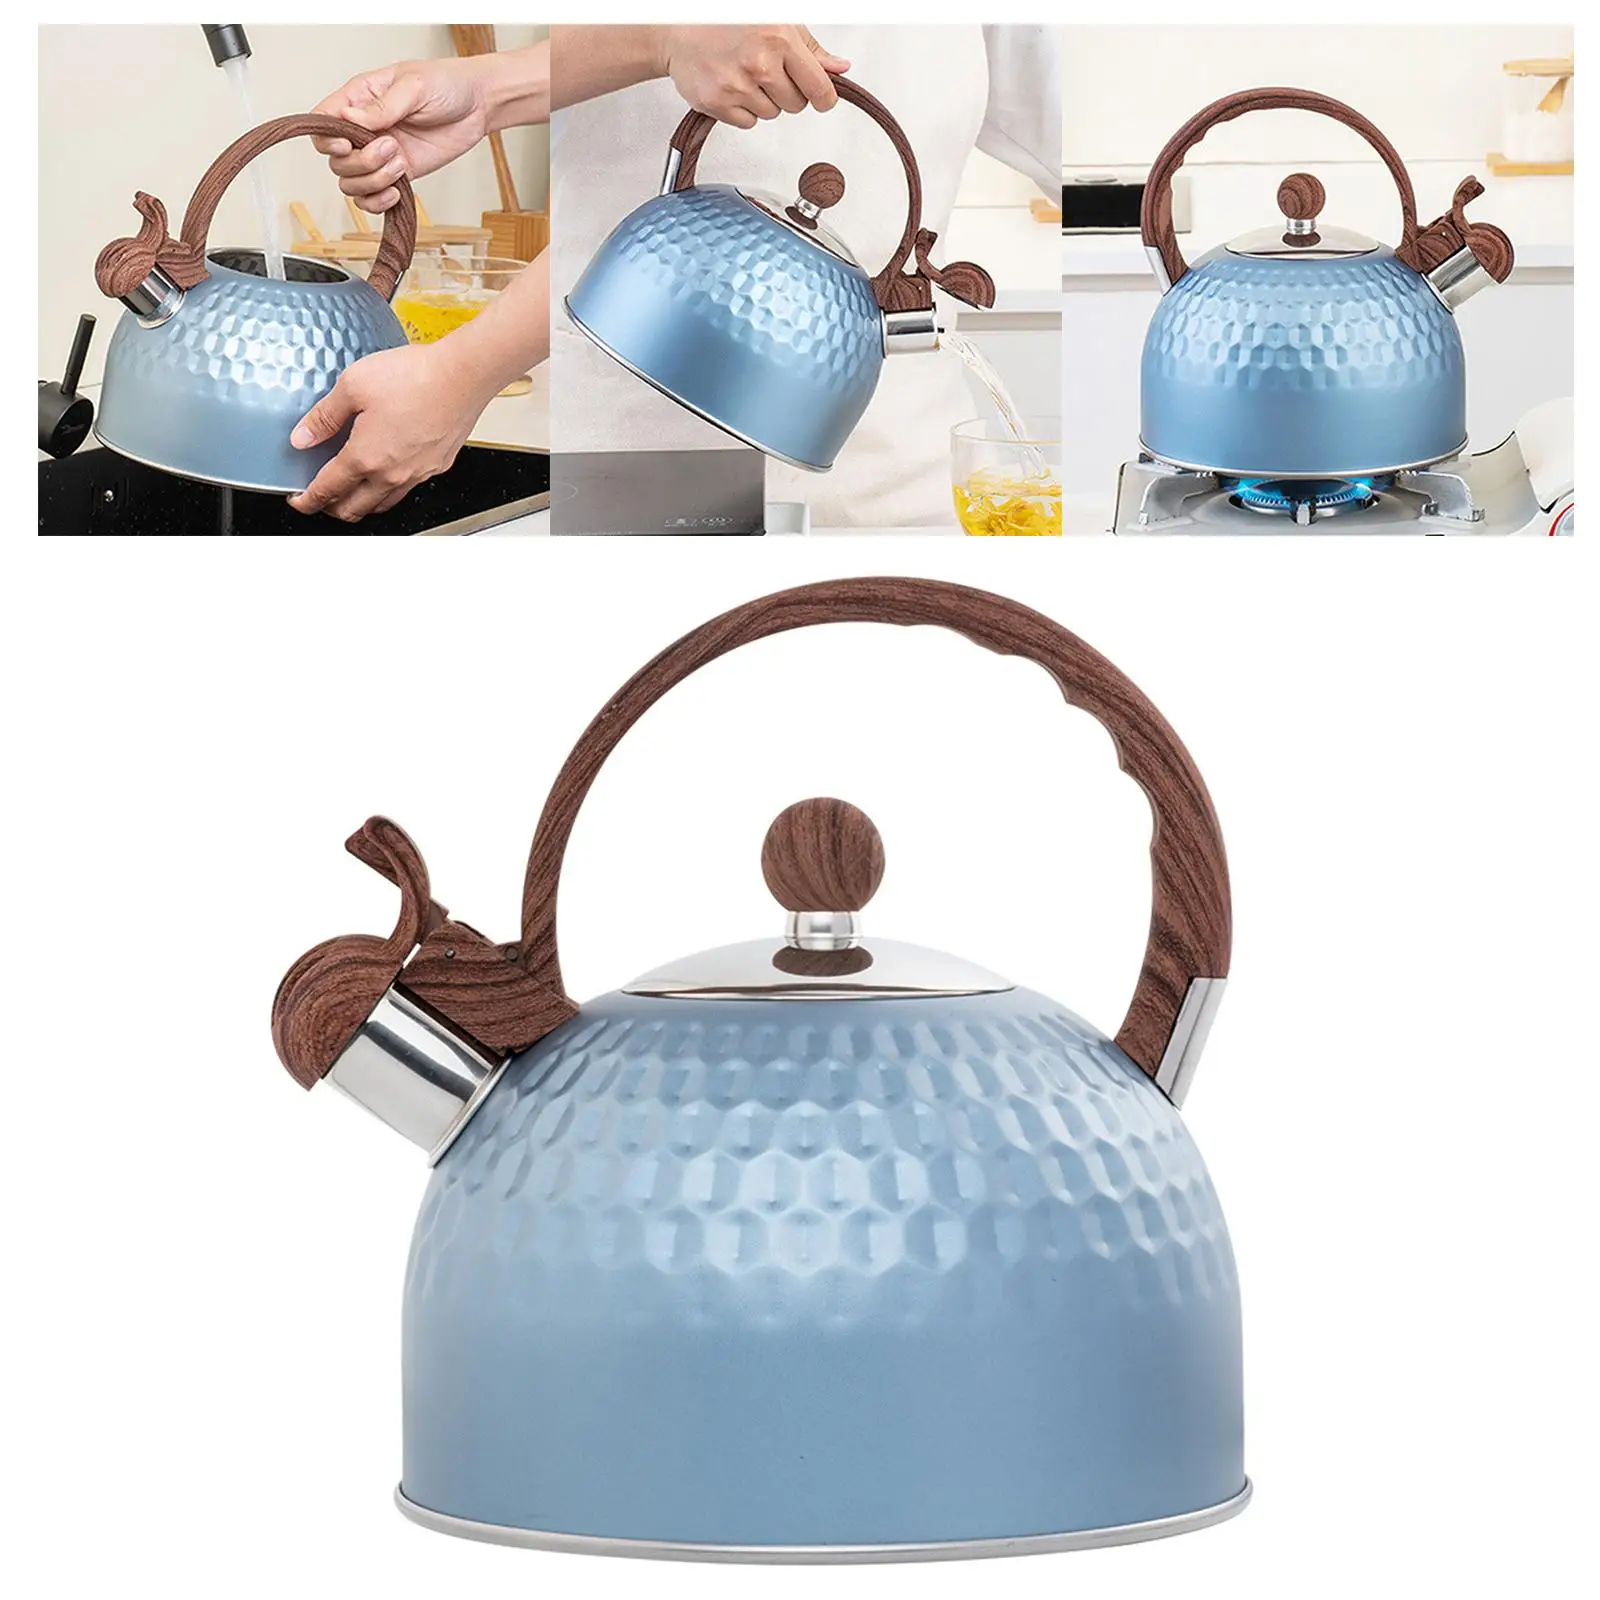 Household Whistling Kettle with Wooden Handle Stainless Steel Hiking Teapot Coffee Tea Kettle Water Kettle for Travel Picnic